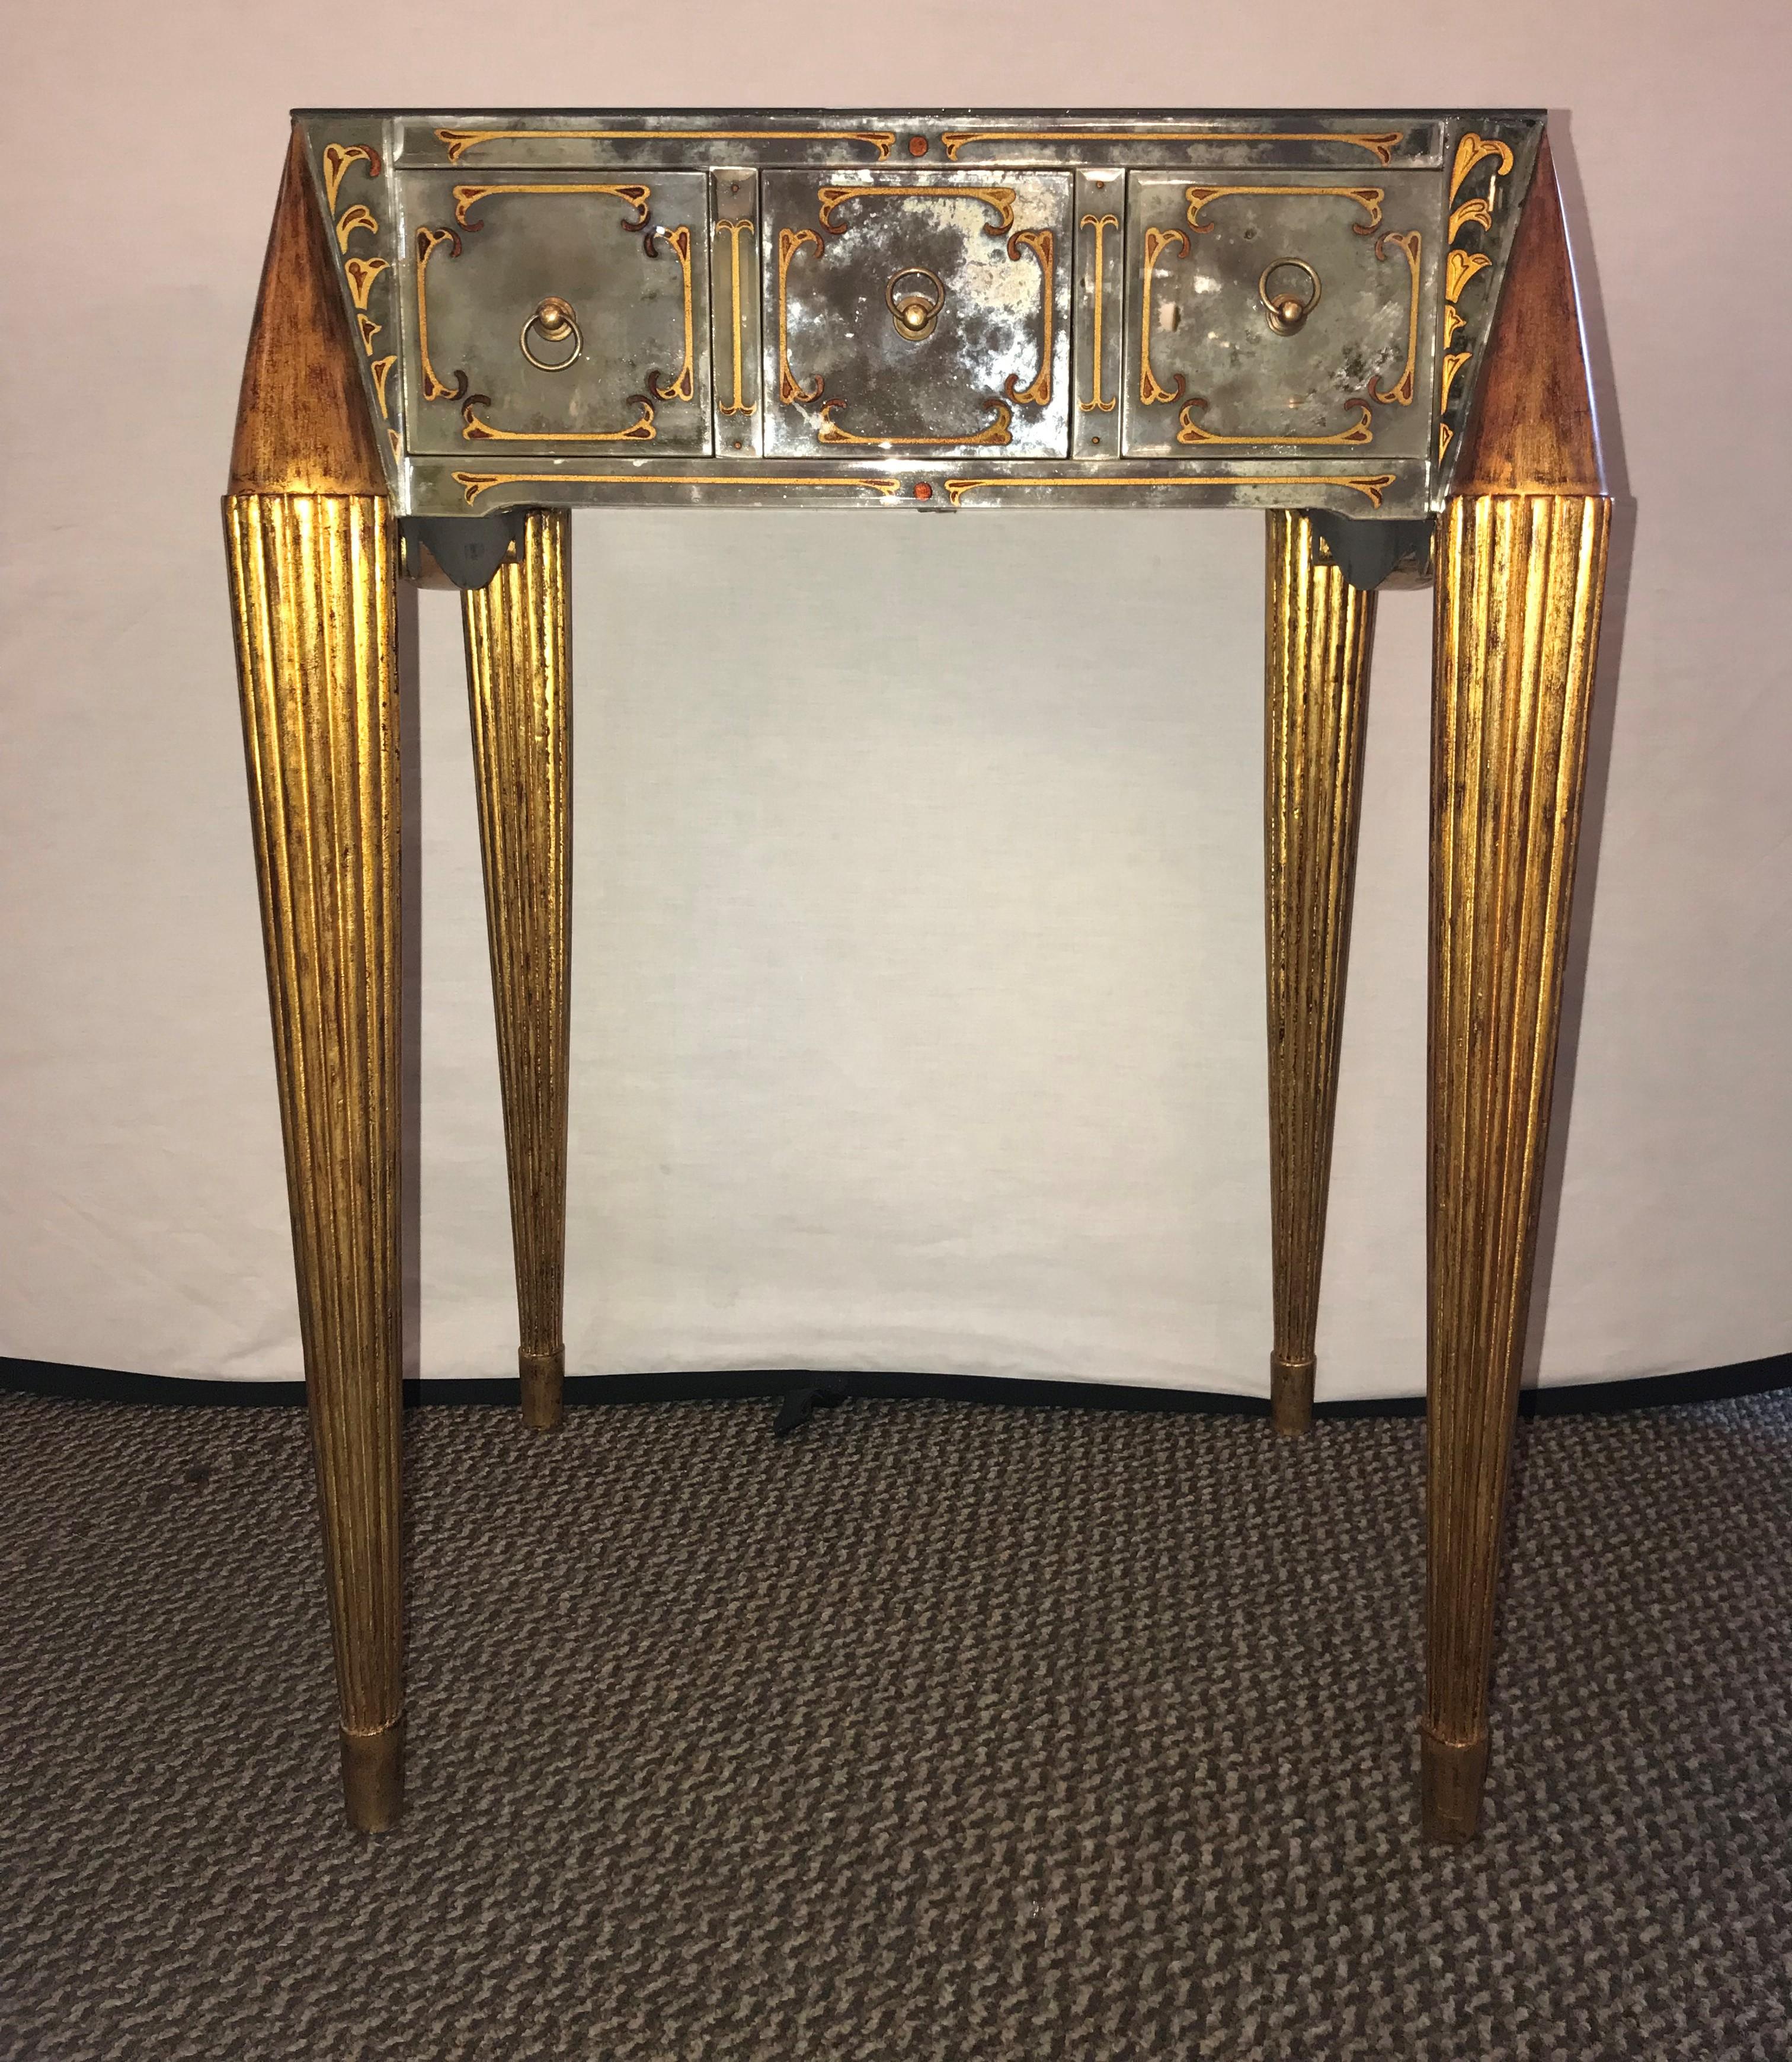 An end table with gilt legs and églomisé designed mirrored top and sides. Having fine gilt legs supporting an upper case of églomiséd mirrored glass with one drawer. There is a small two inch damage to the top that is really not very noticeable. We